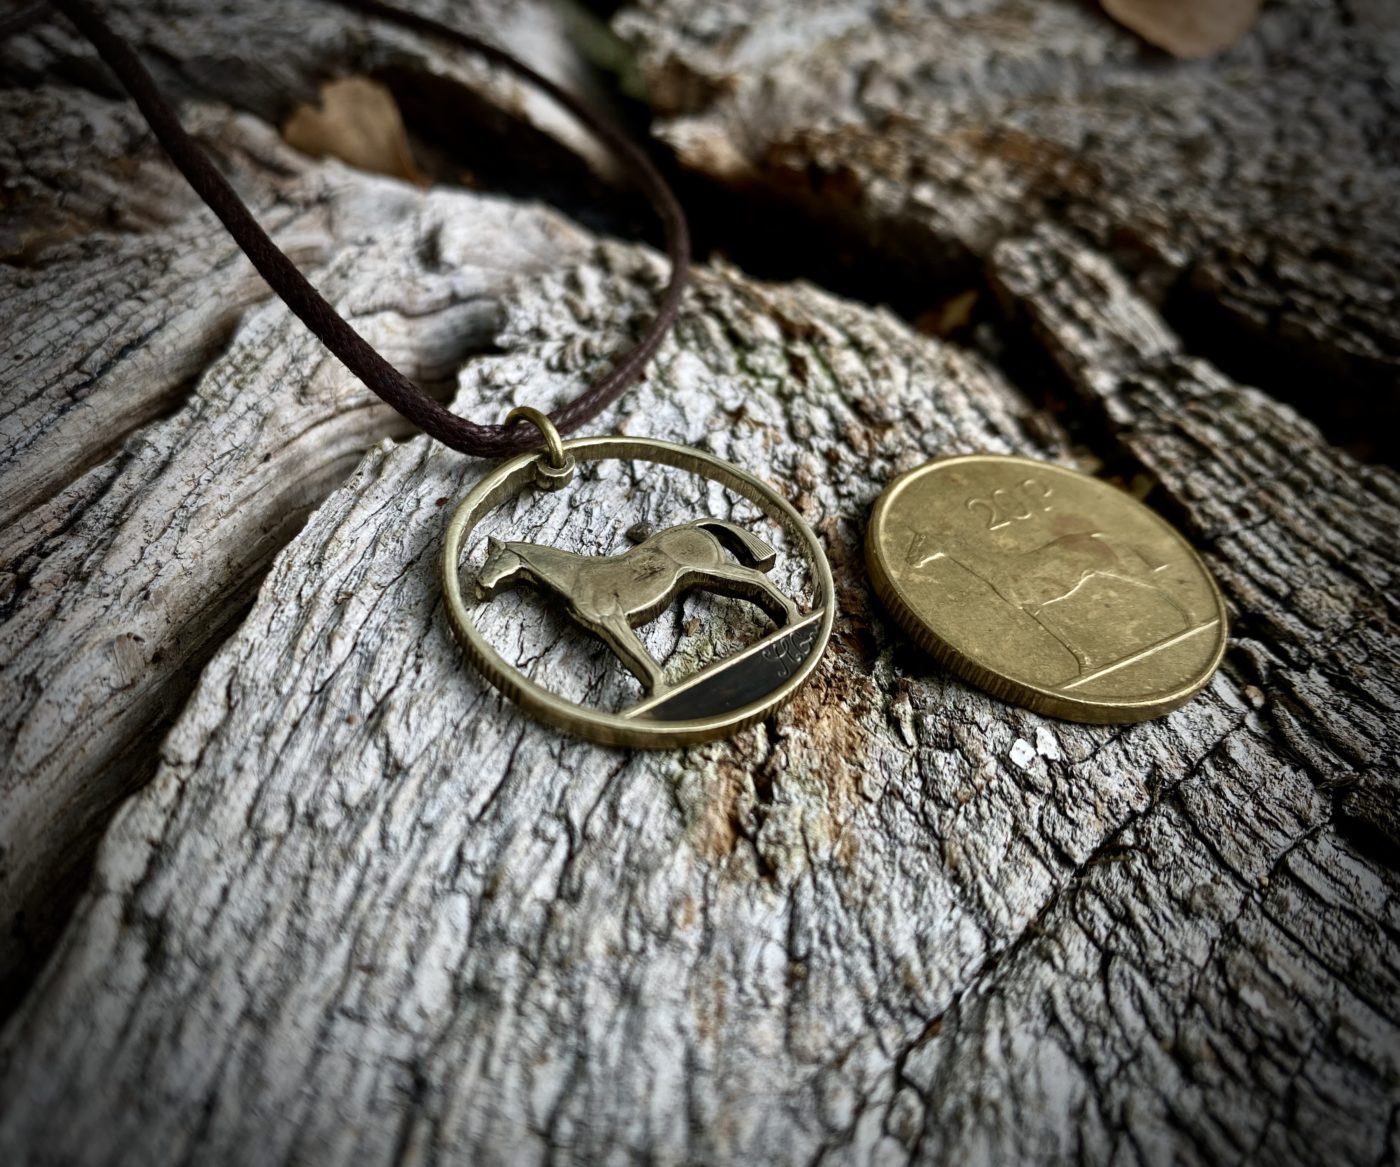 Handmade and recycled irish hunter horse coin pendant necklace